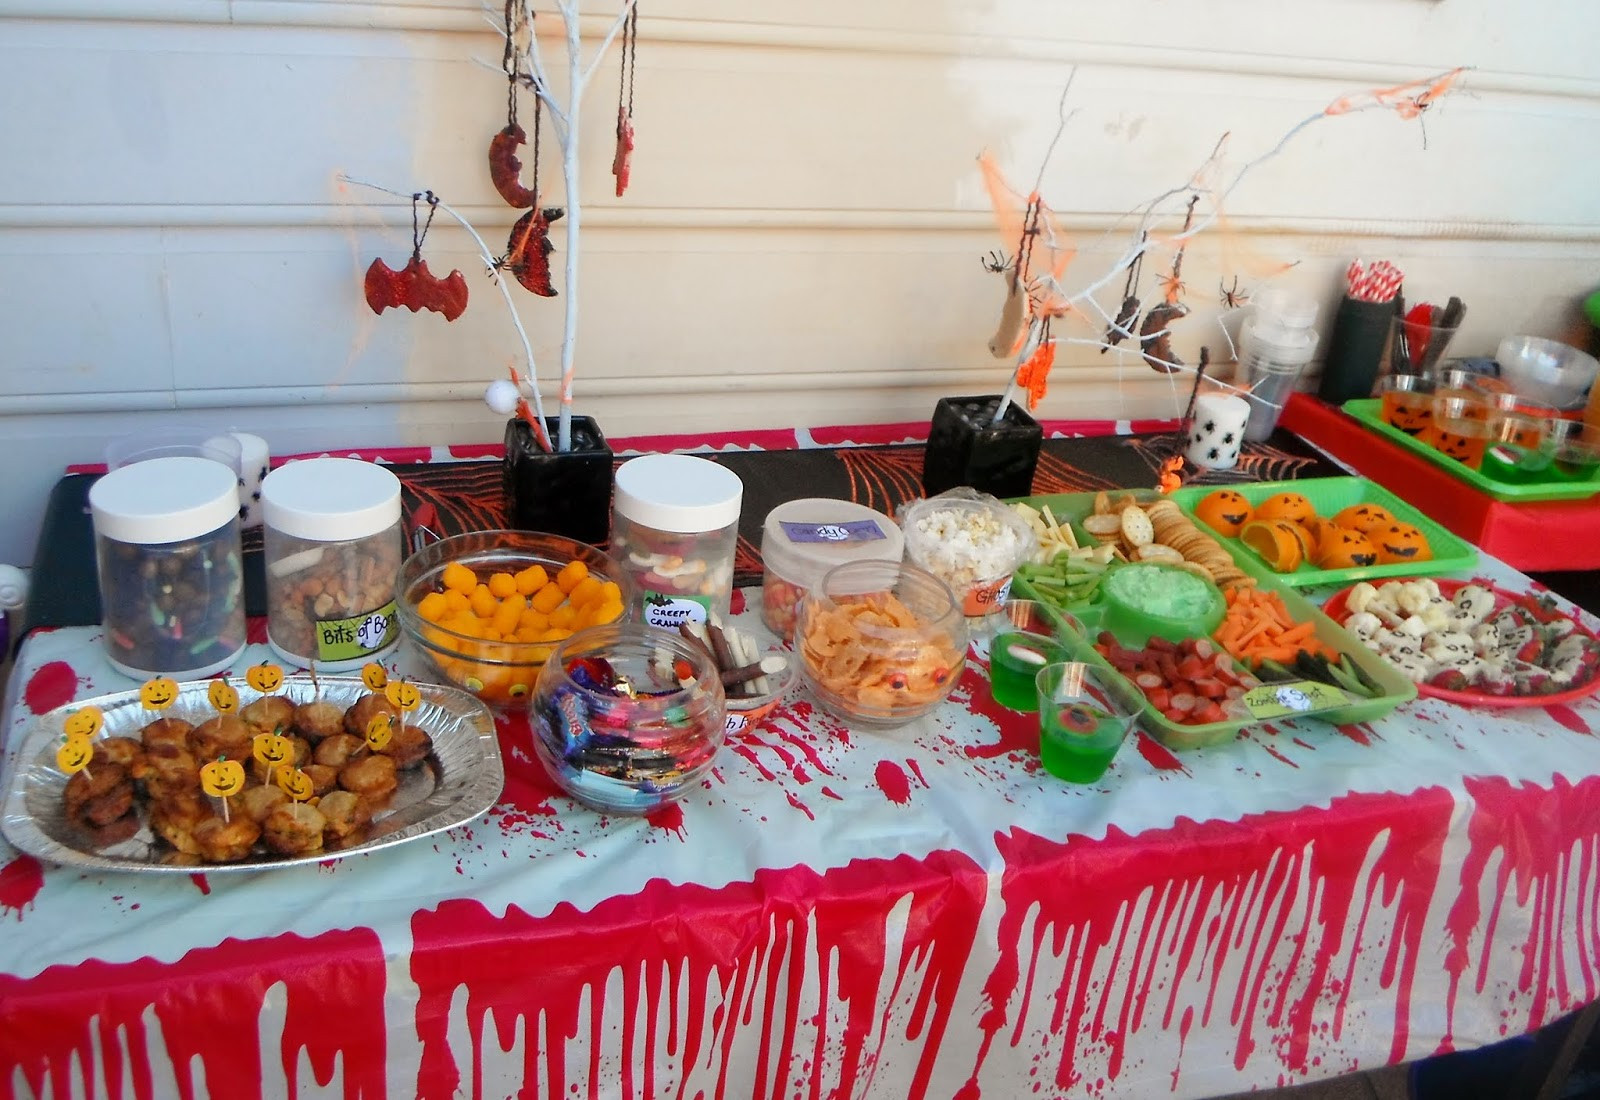 Halloween Party Food Ideas For Teens
 Adventures at home with Mum Halloween Party Food